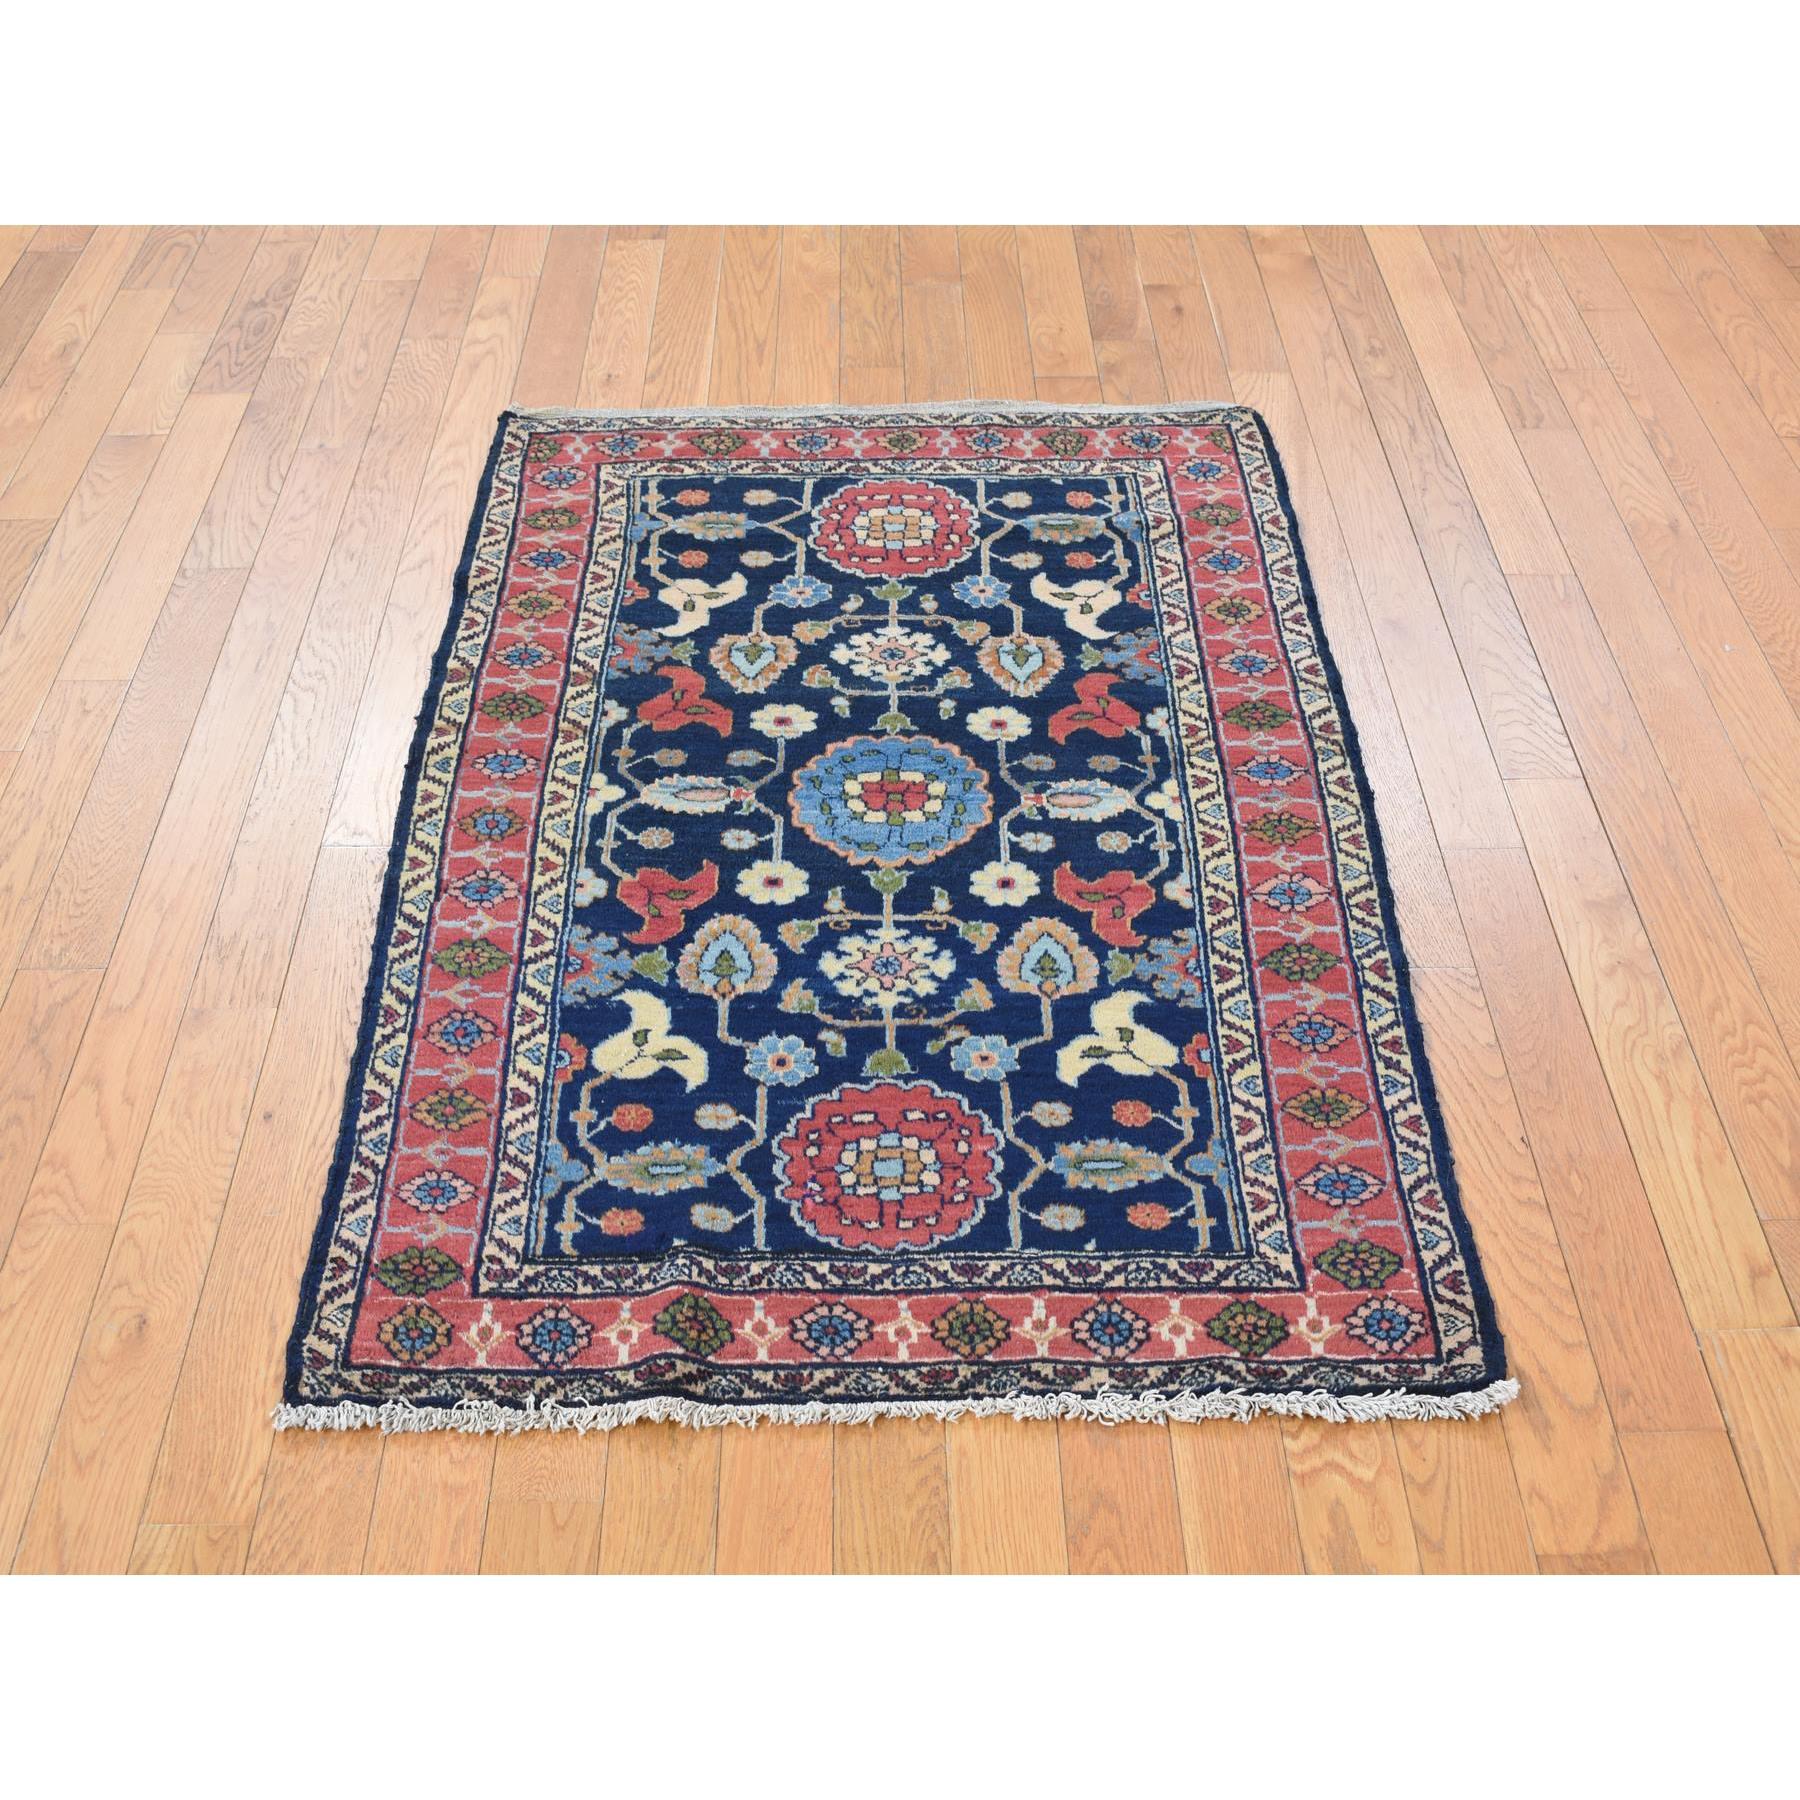 Medieval Blue Antique Persian Lilihan Full Pile Clean and Soft Hand Knotted Rug 3'1